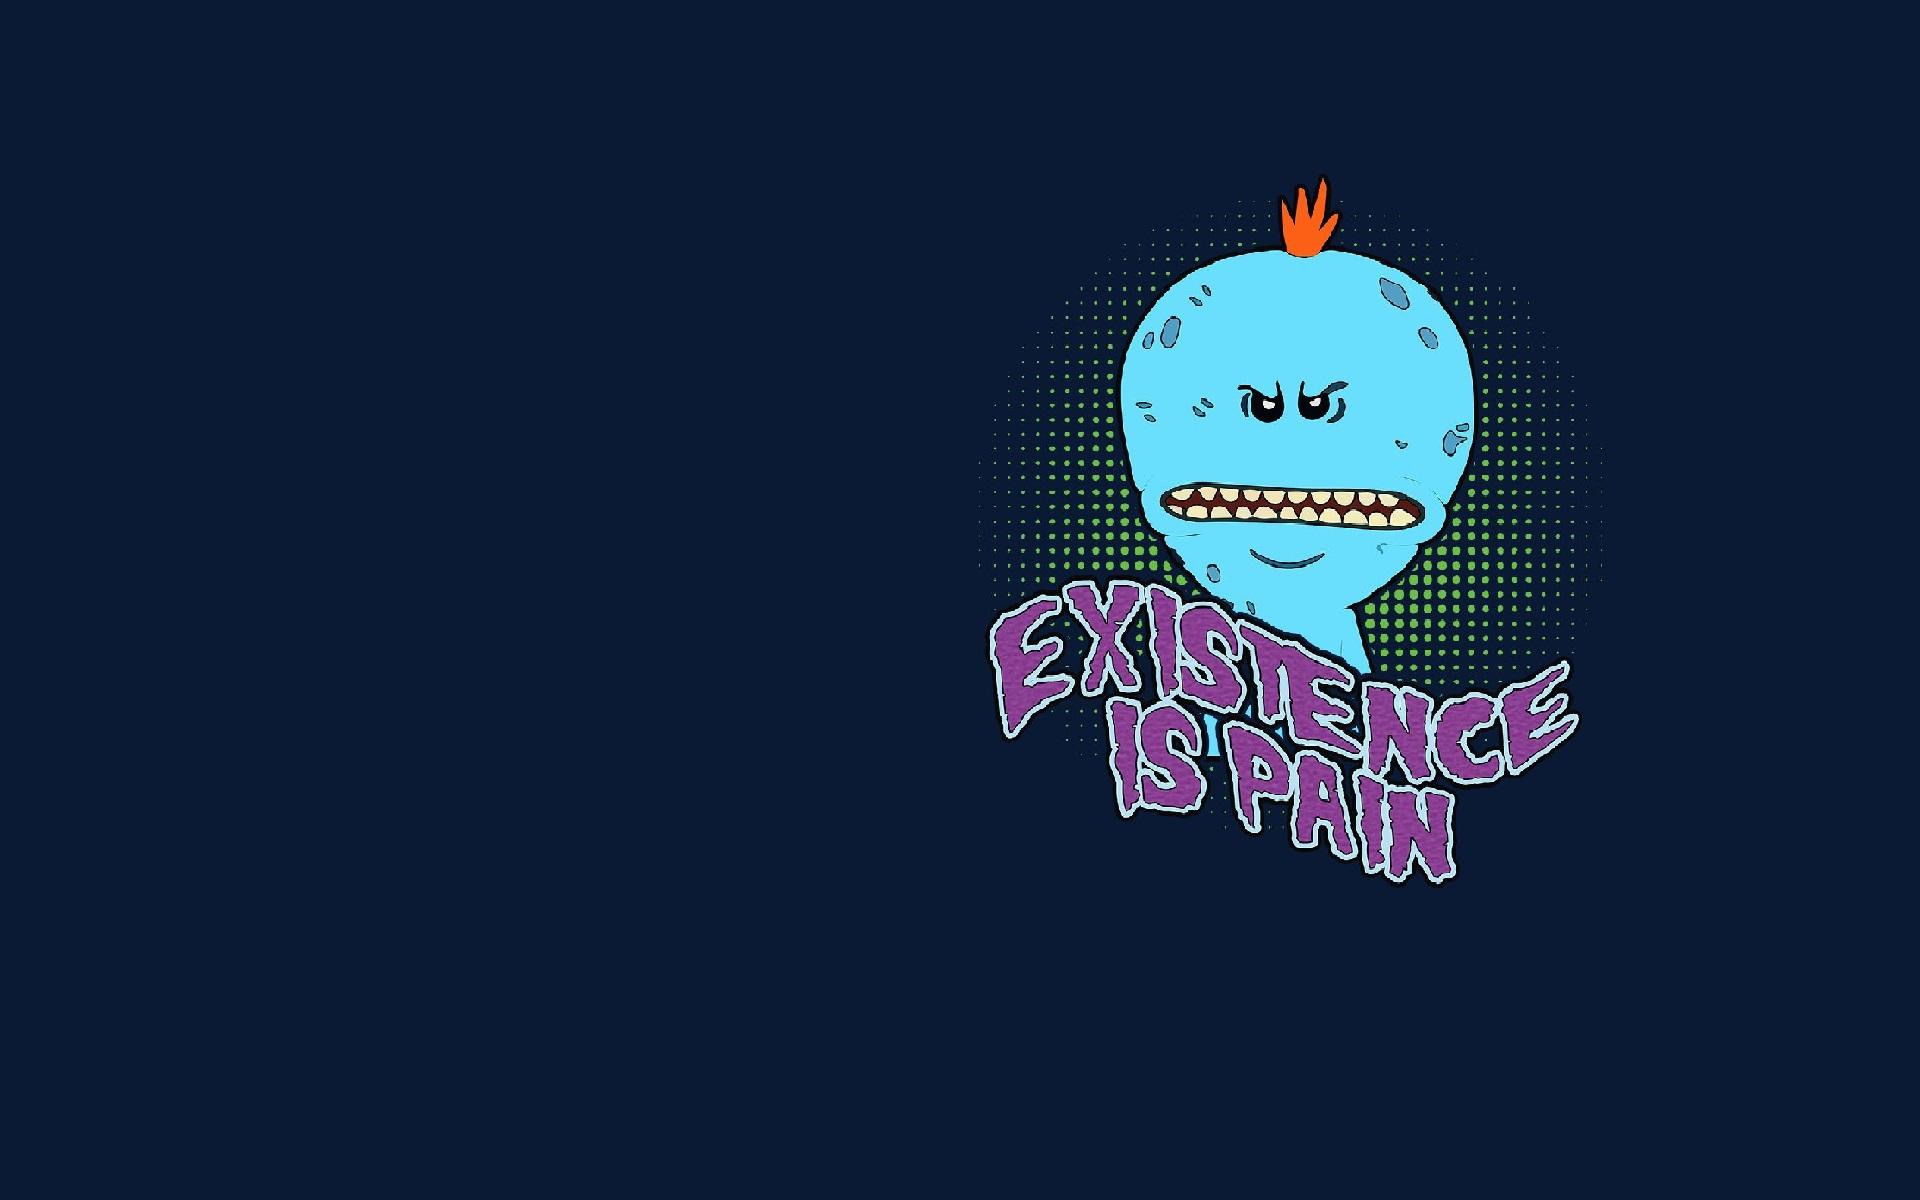 Rick and Morty. Mr. Meseeks (angry face). Existence is